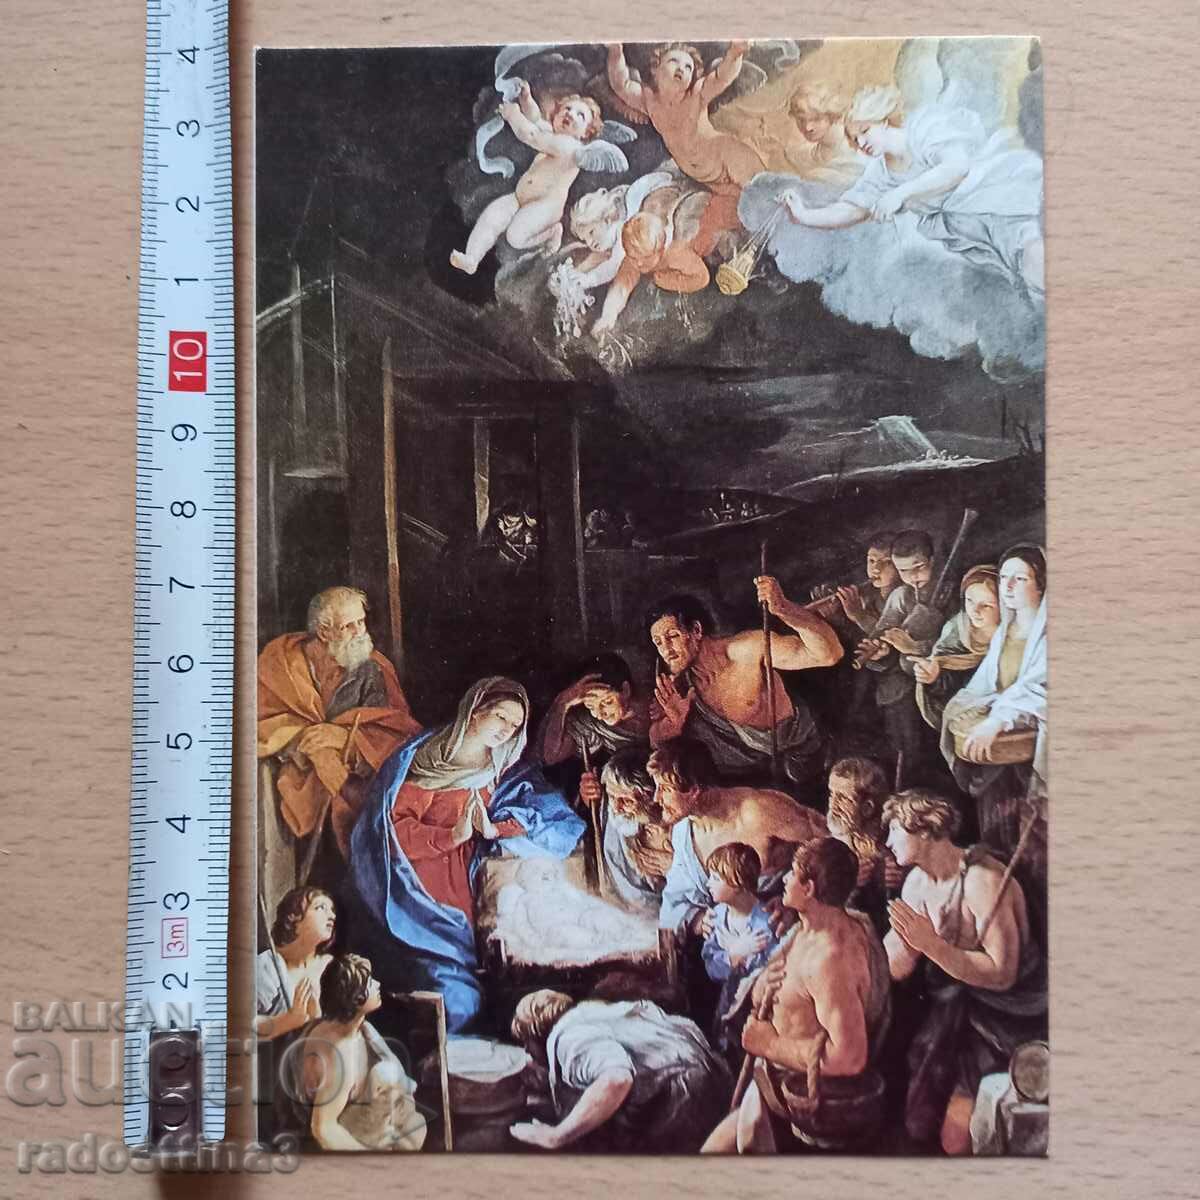 Card from the Soc Nativity of Christ